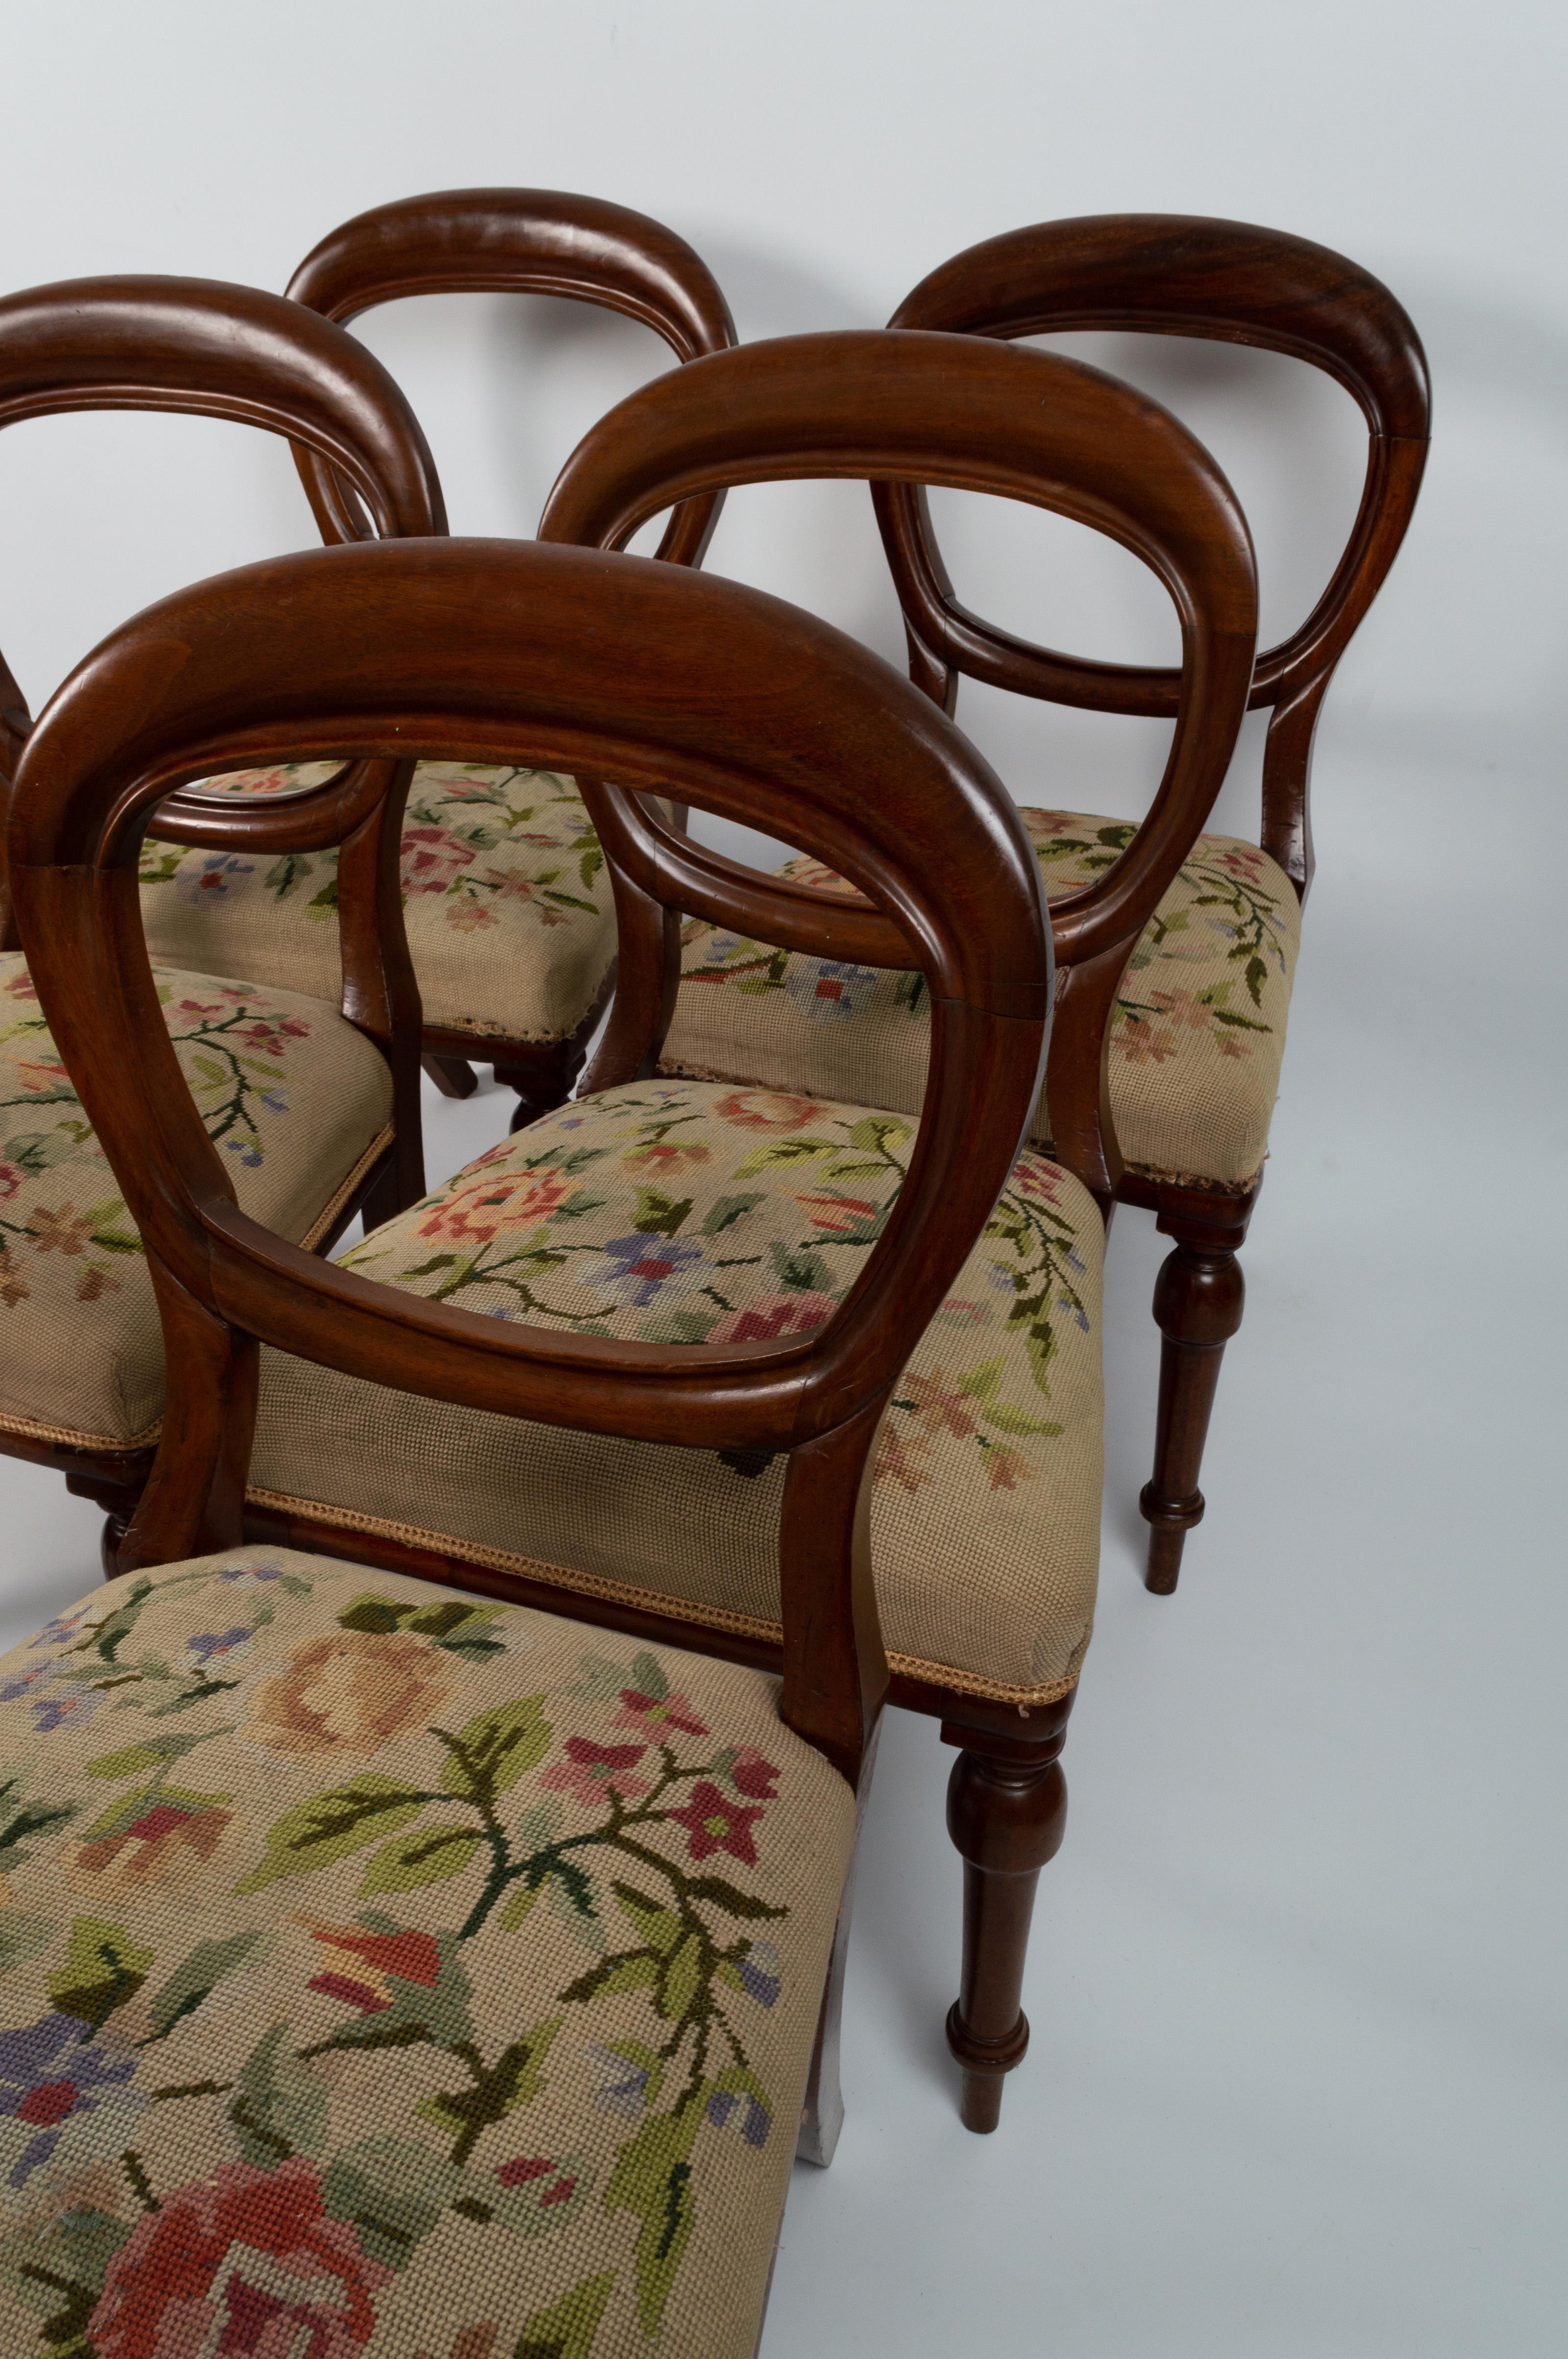 Set of Six Antique English 19th Century Mahogany Balloon Back Chairs circa 1860 For Sale 4